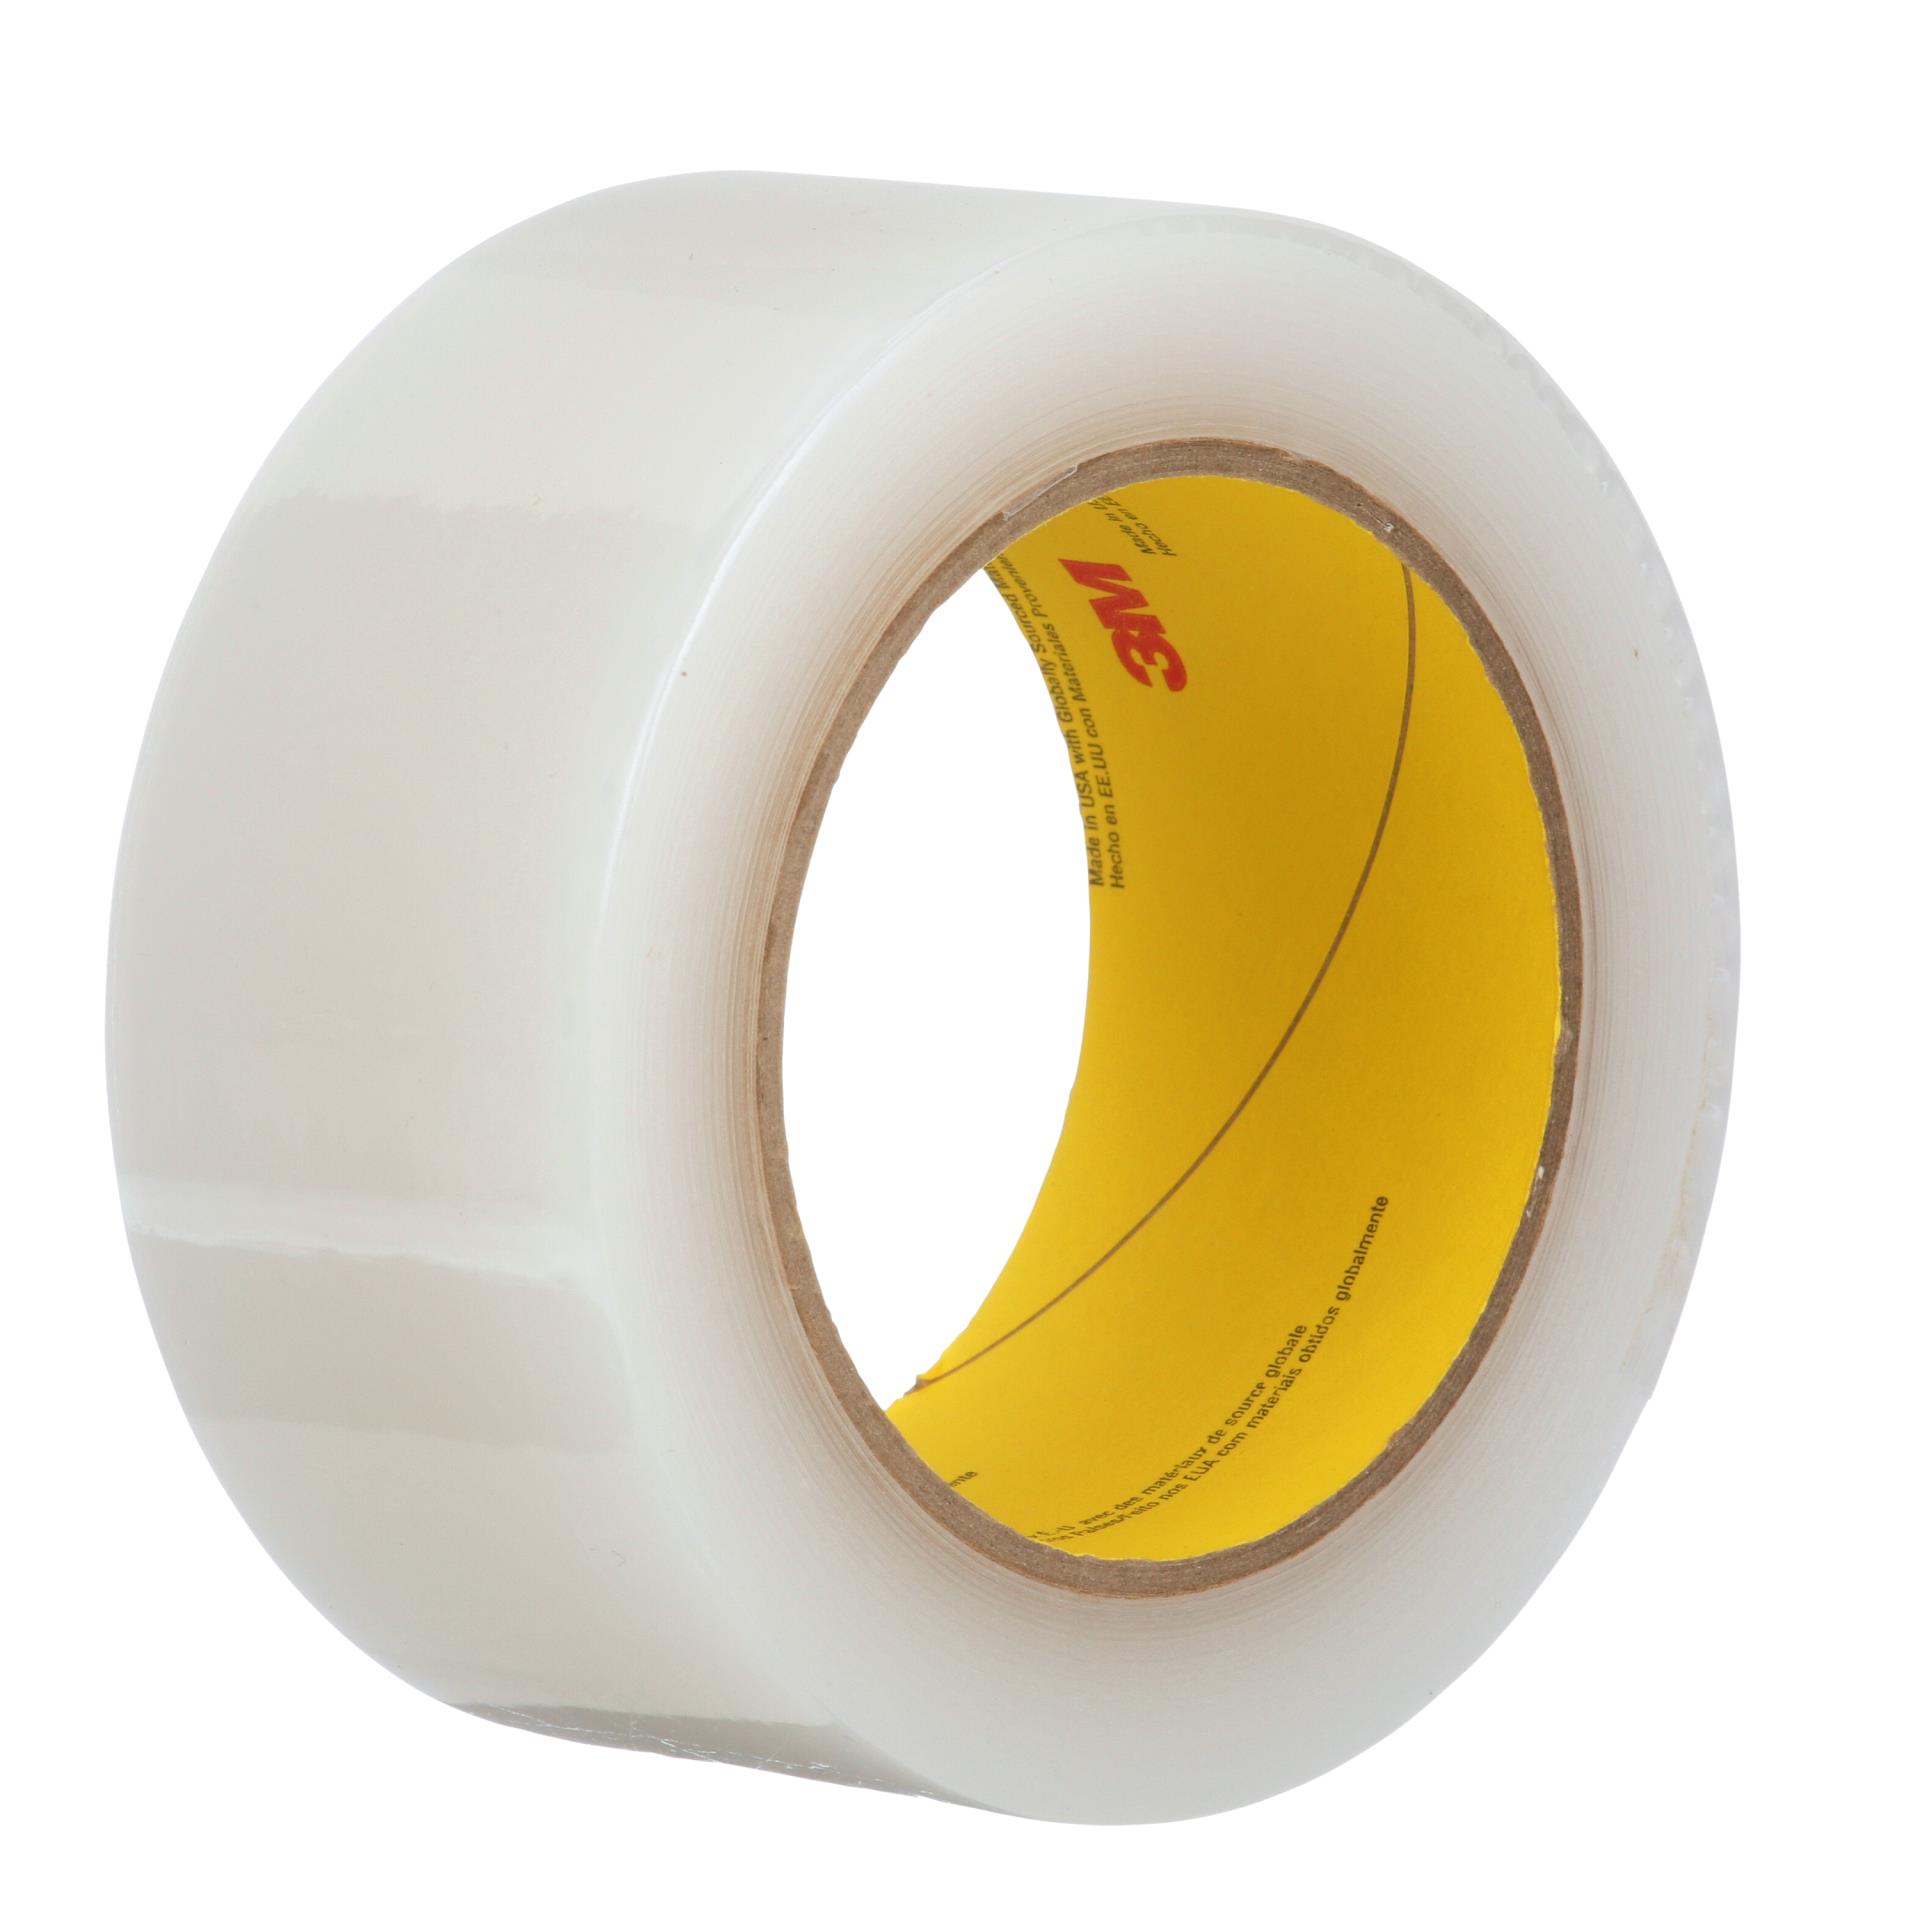 3mm Thick 3m 4959 Strong Adhesive Double Sided Tape Acrylic Foam